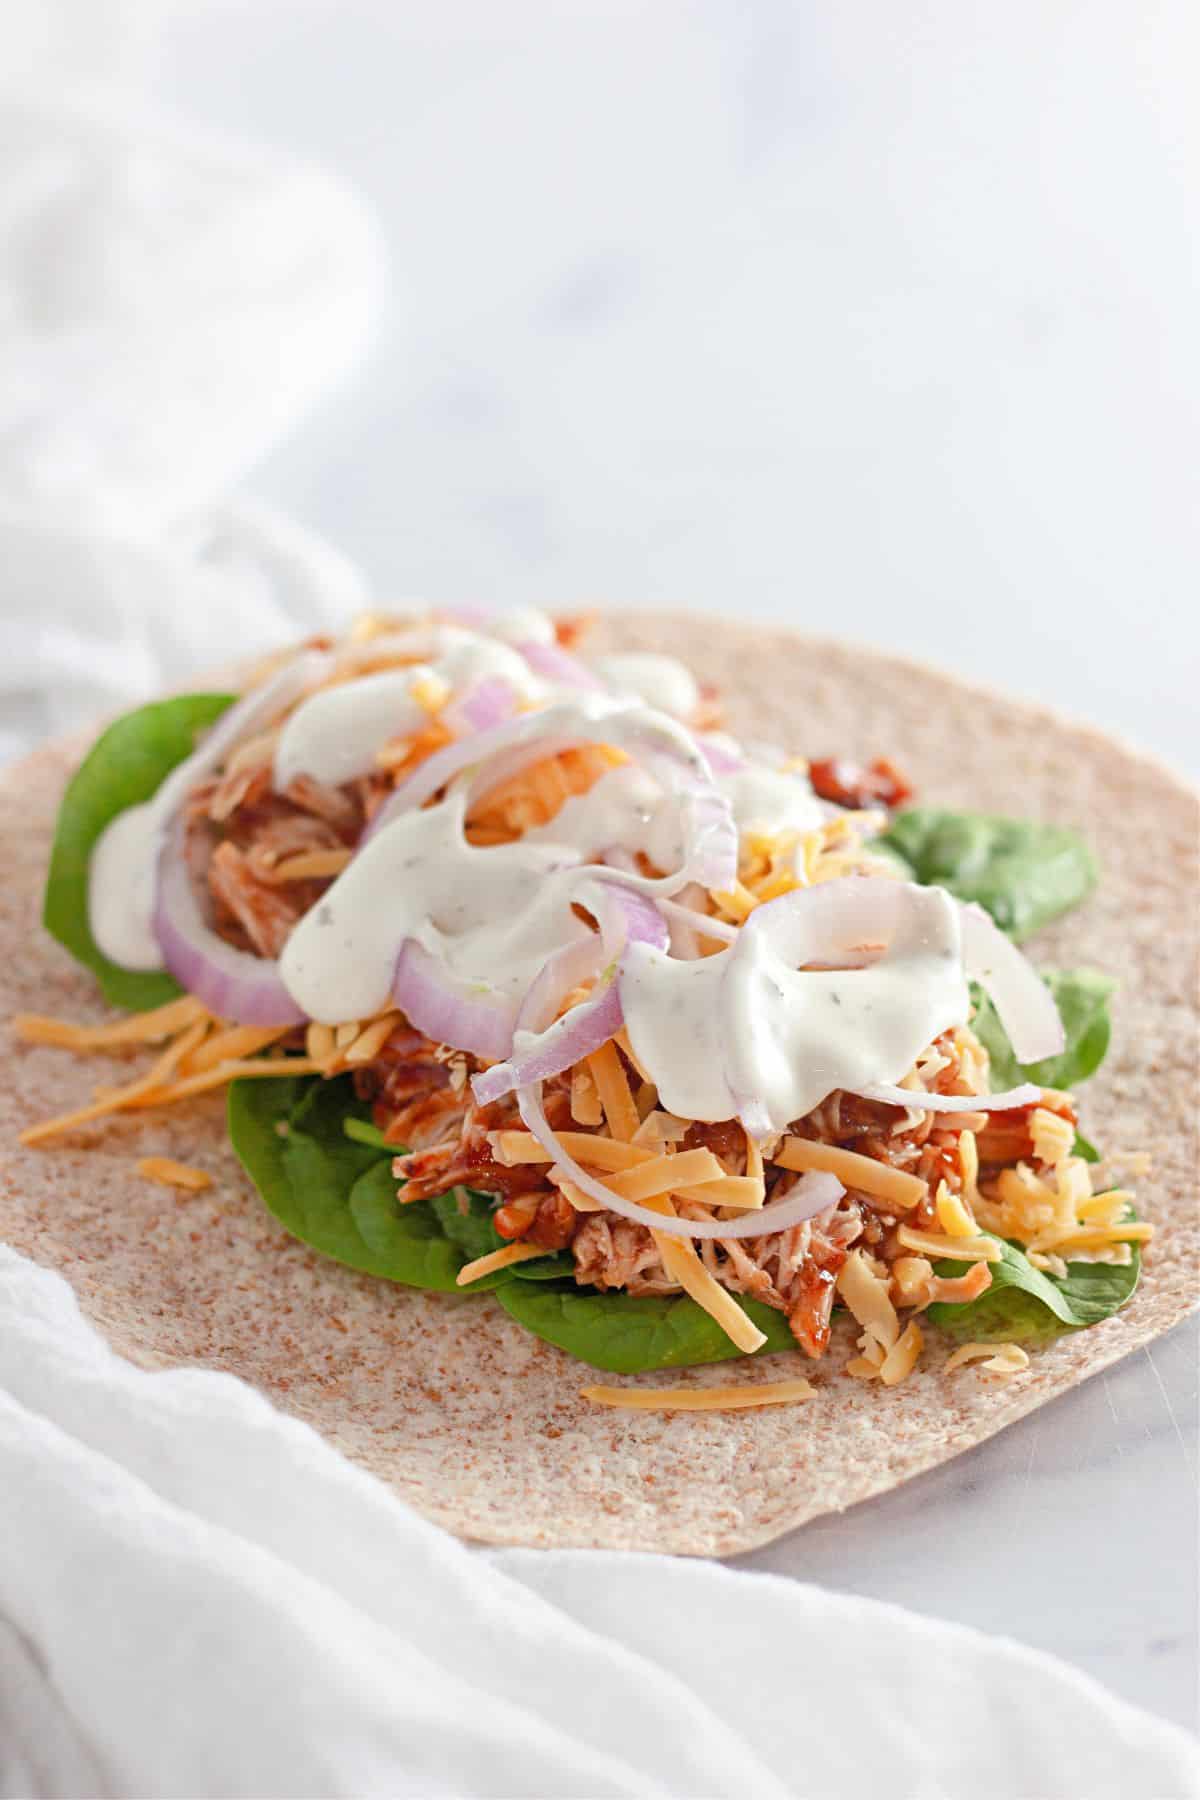 A wrap filled with BBQ chicken, red onions, ranch dressing, spinach, and cheese.